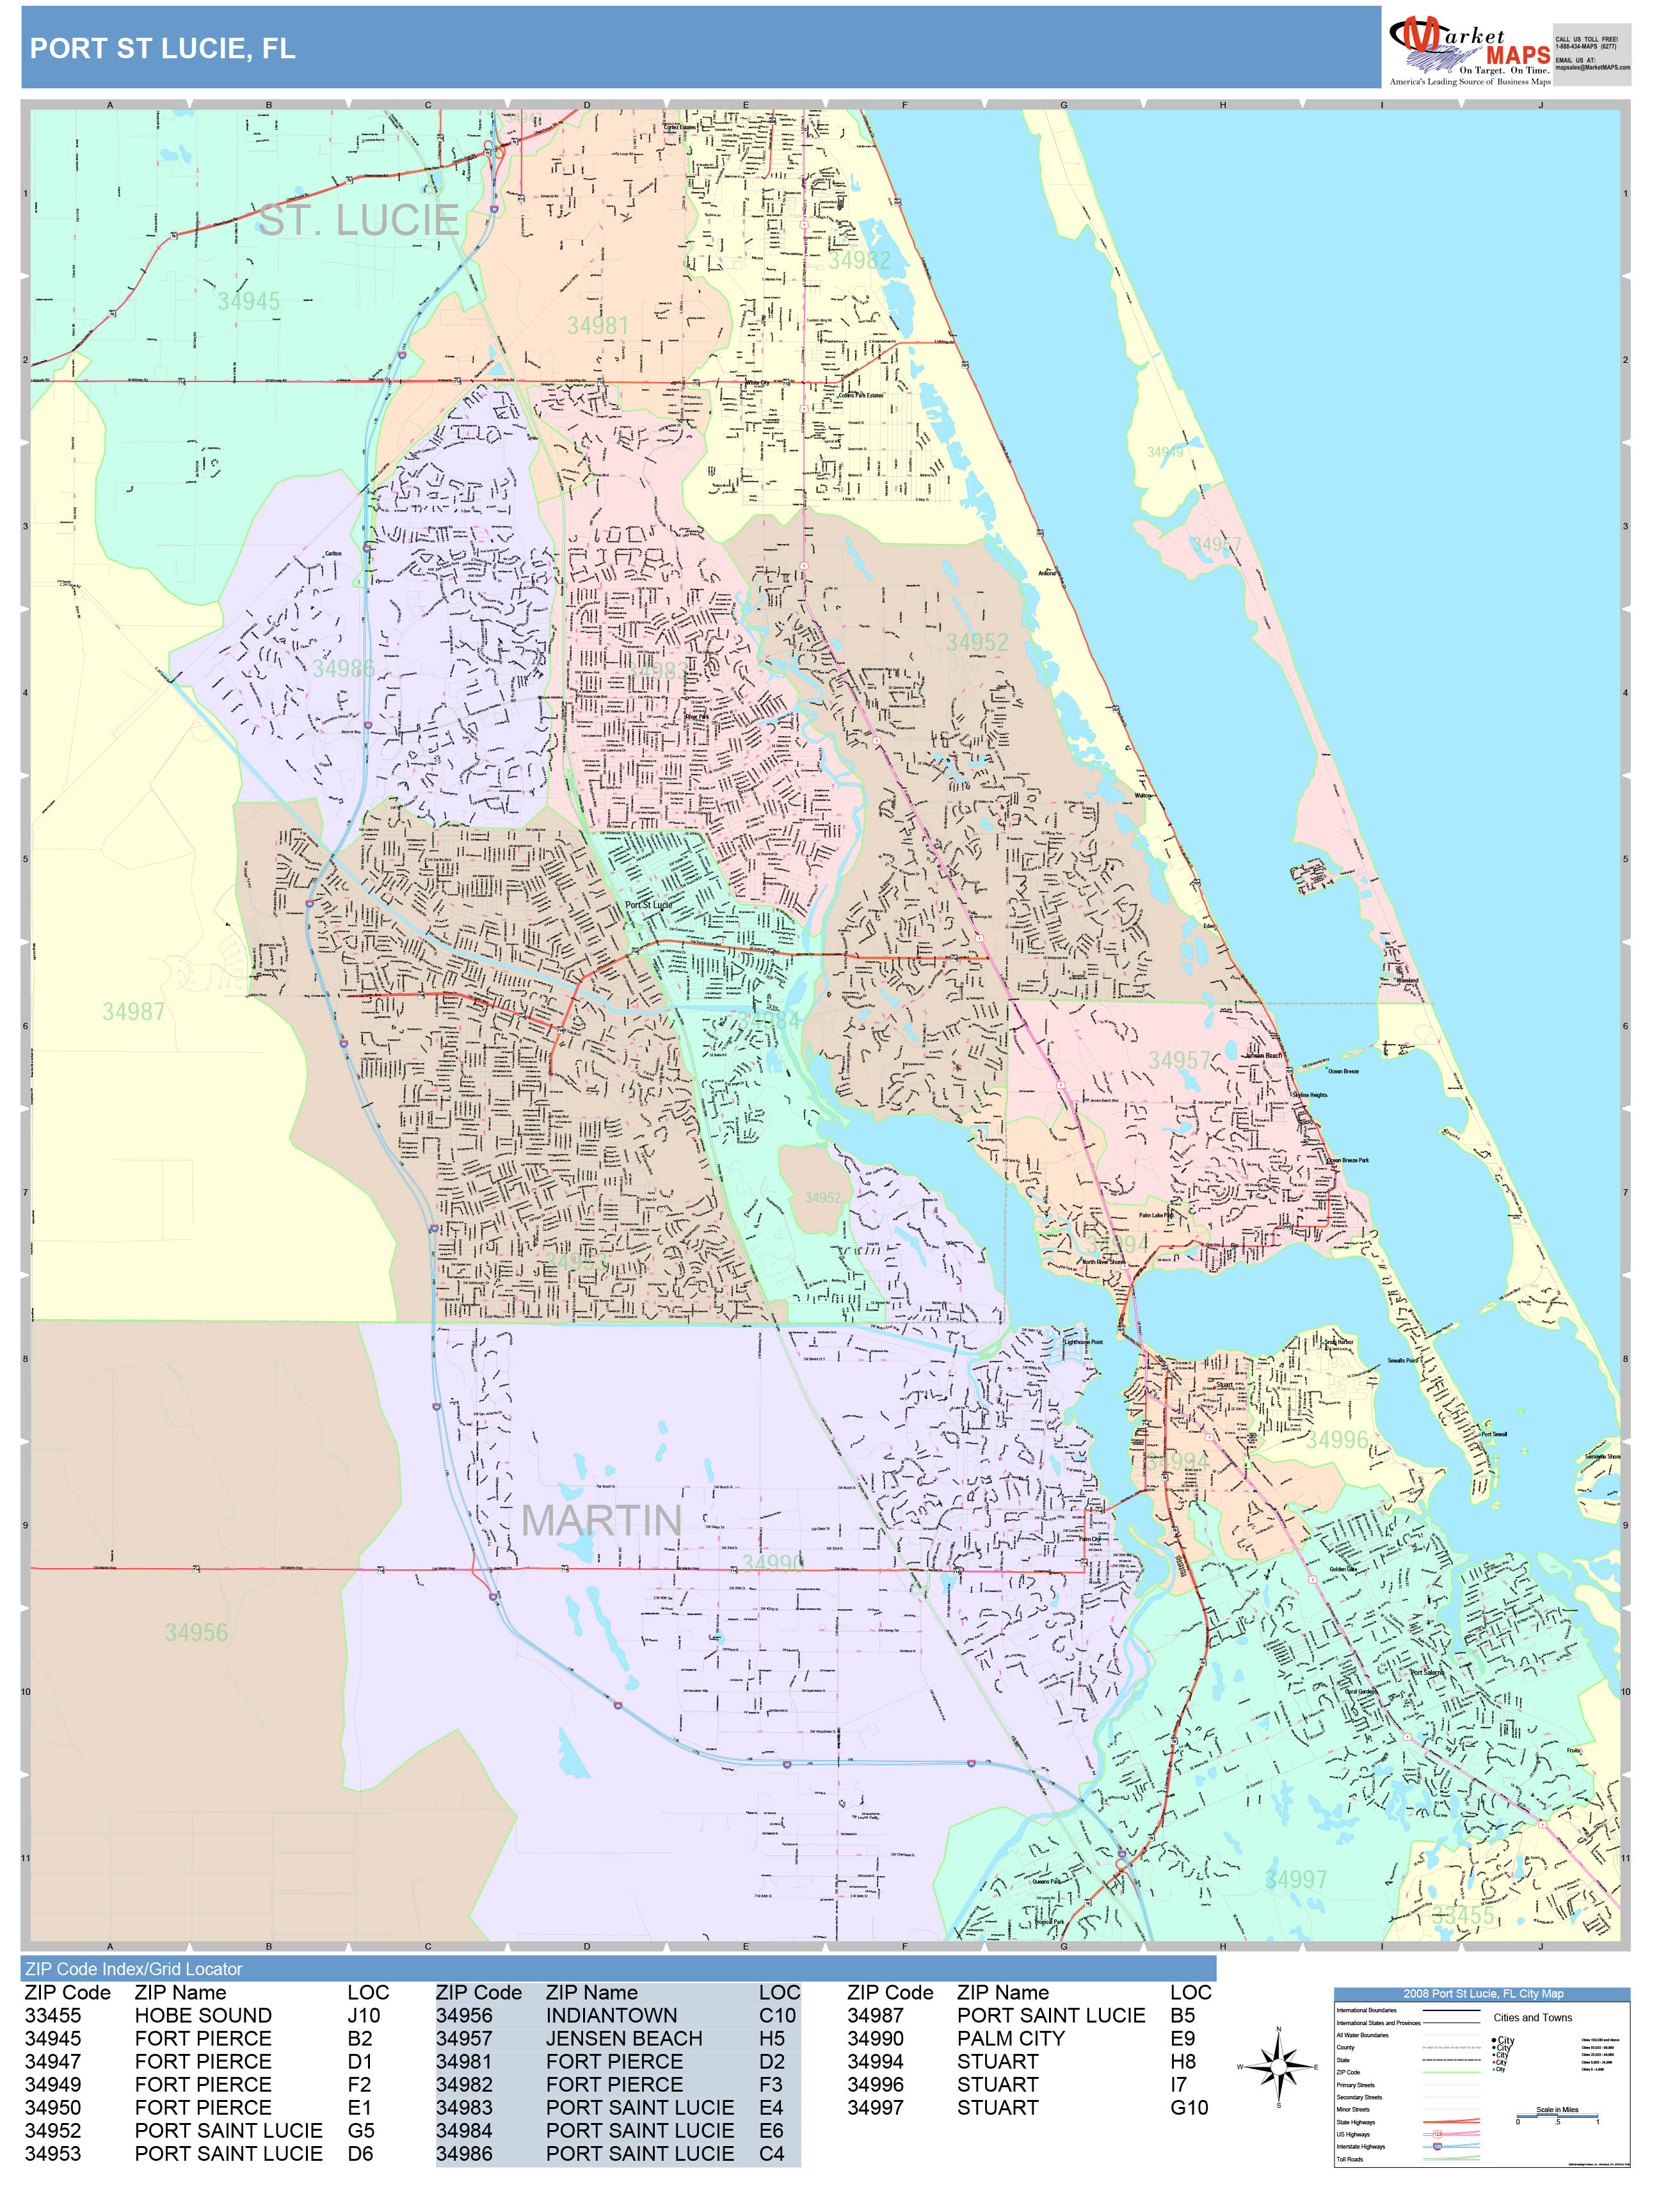 Port St. Lucie Florida Wall Map (Color Cast Style) by MarketMAPS ...